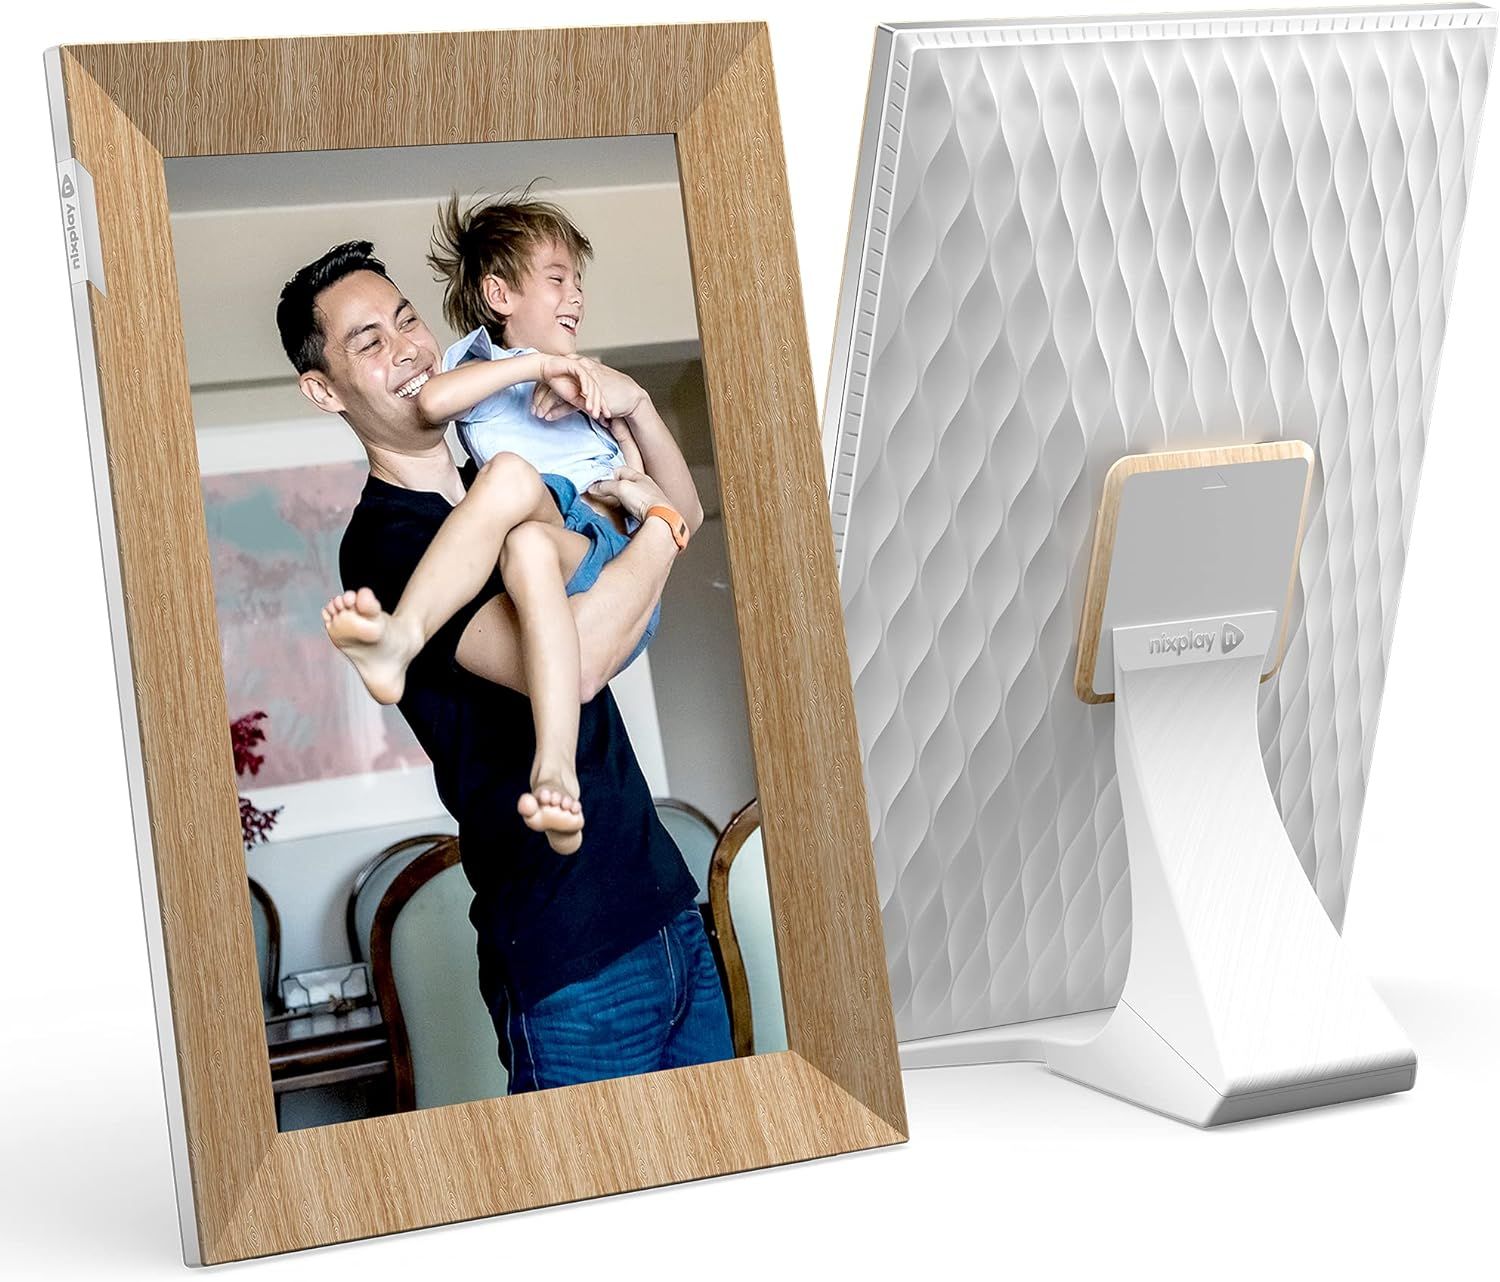 Nixplay 10.1 inch Touch Screen Digital Picture Frame with WiFi (W10K) - Wood Effect - Share Photo... | Amazon (US)